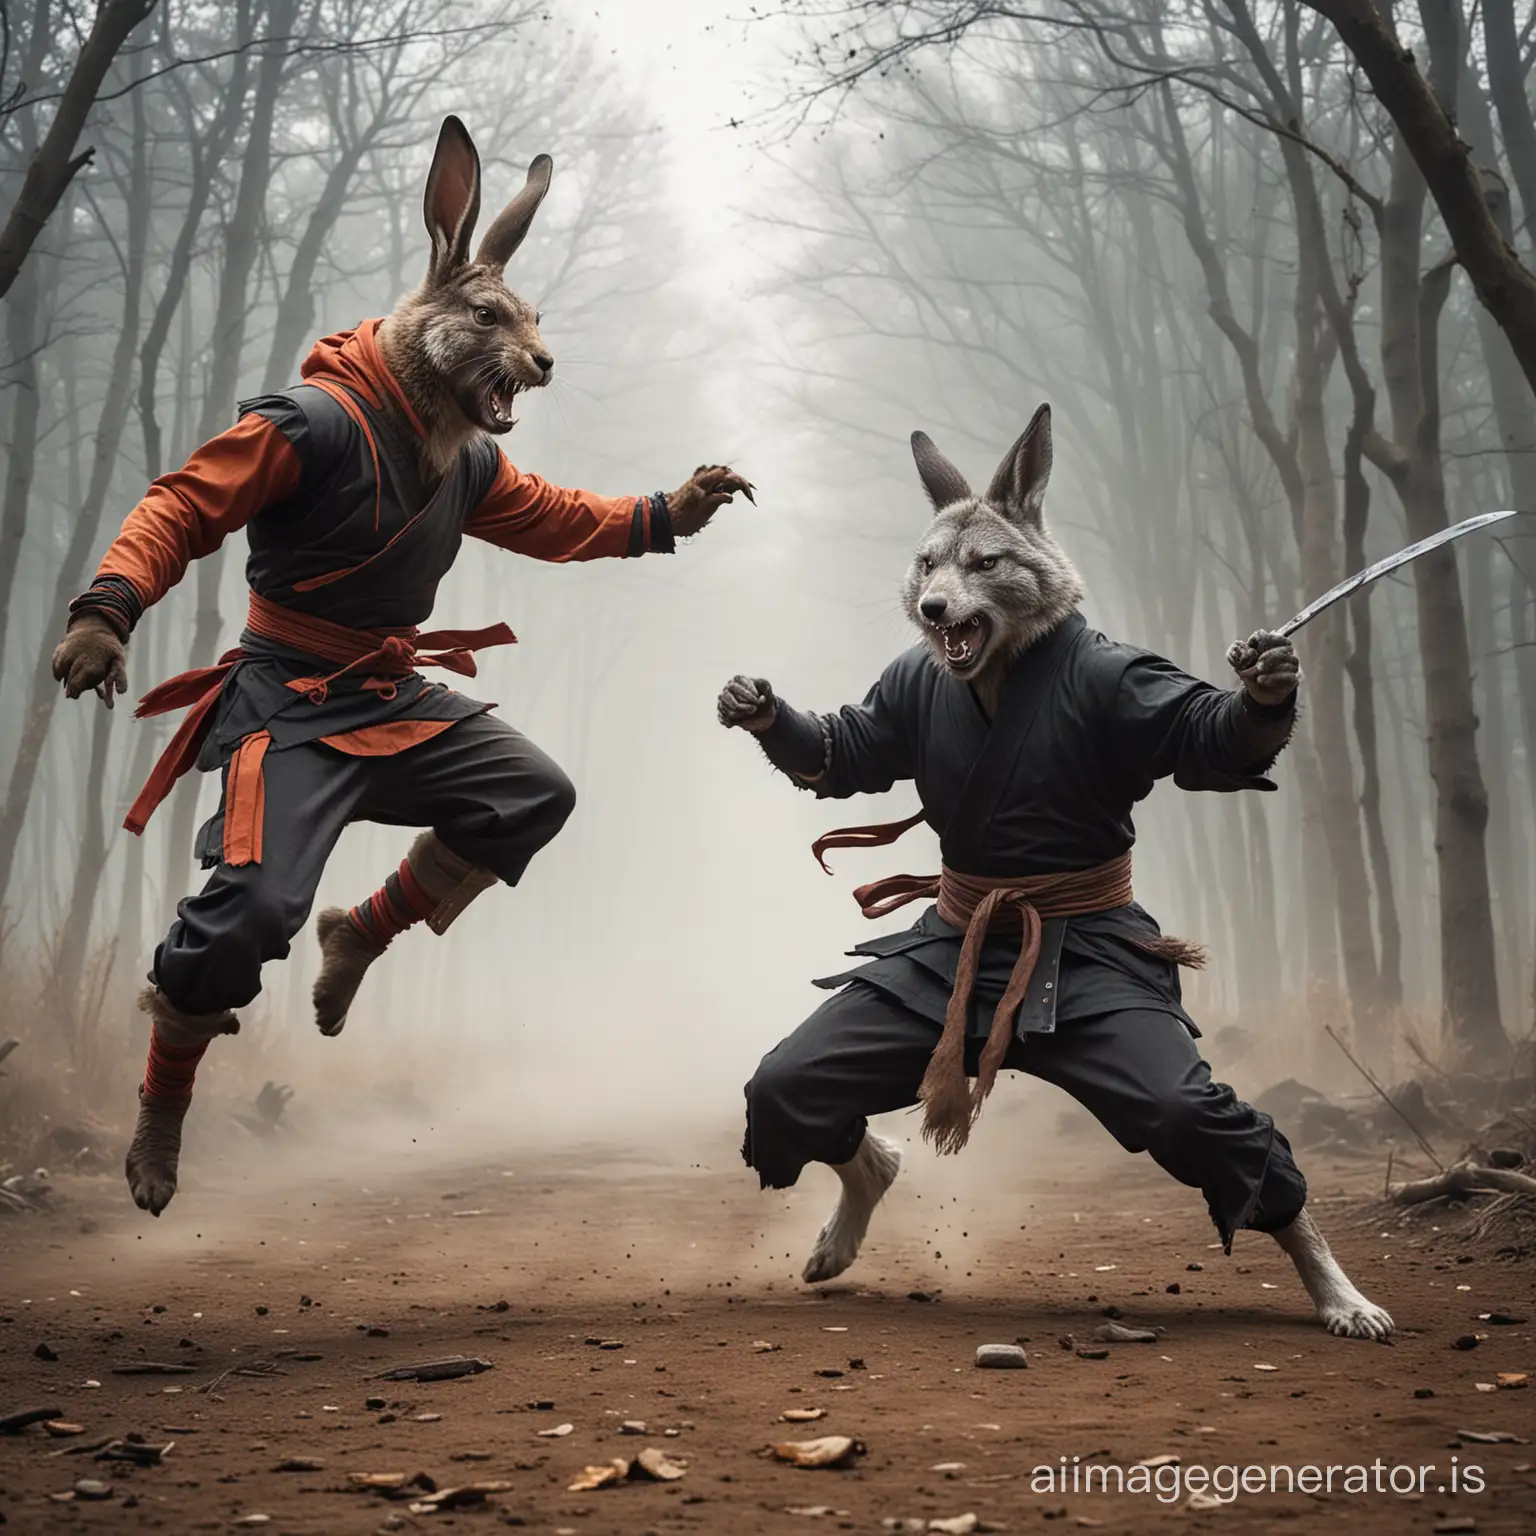 Startled-Ninja-Hare-Confronts-Howling-Wolf-in-MidAir-Encounter